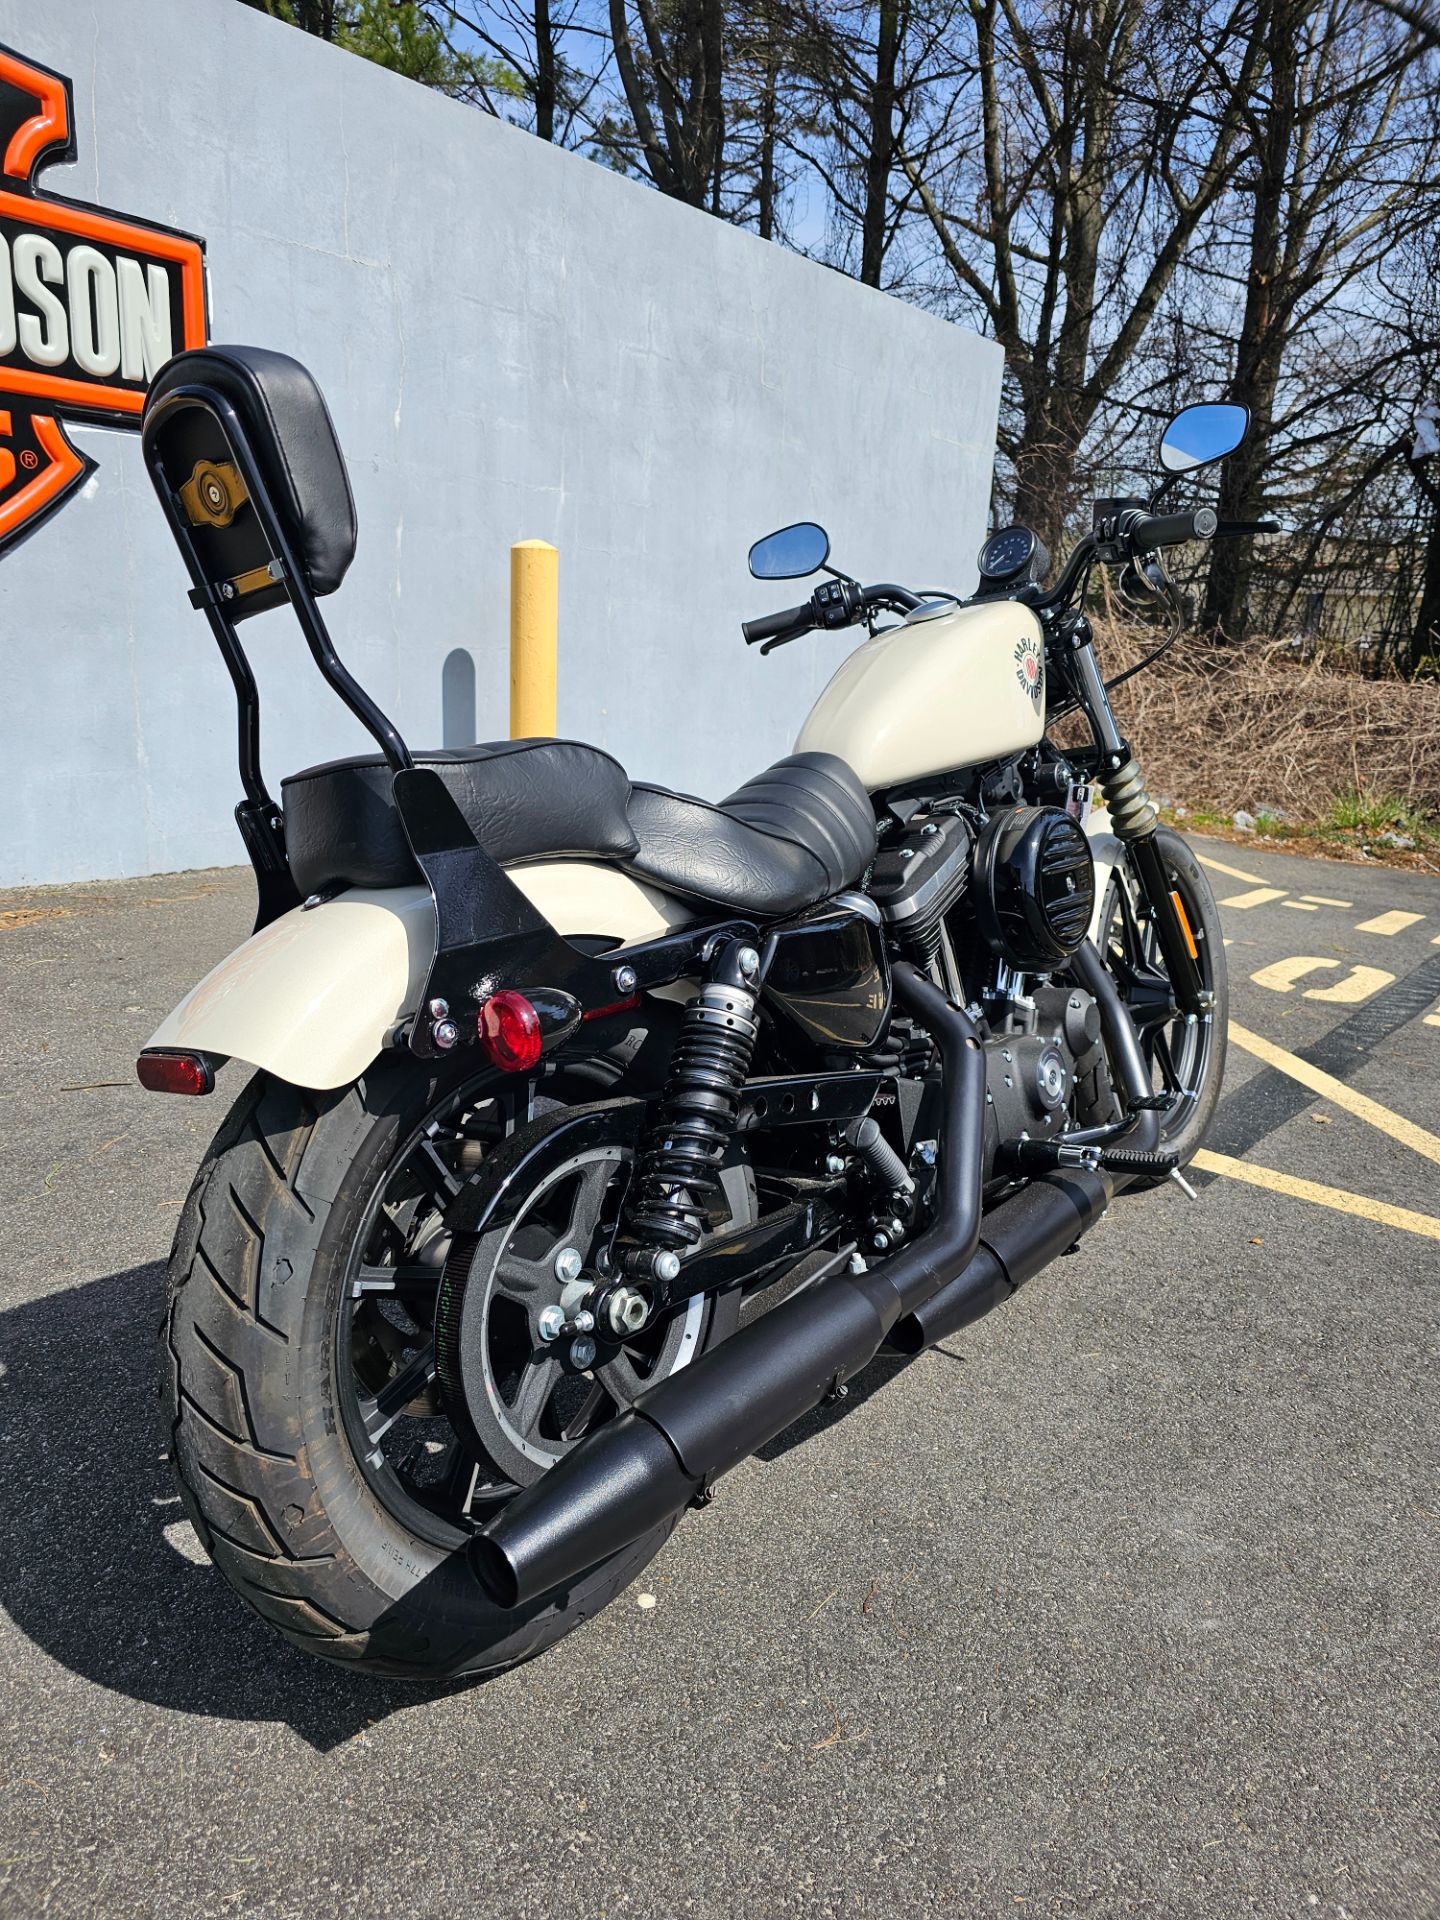 2022 Harley-Davidson IRON 883 SPORTSTER in West Long Branch, New Jersey - Photo 8